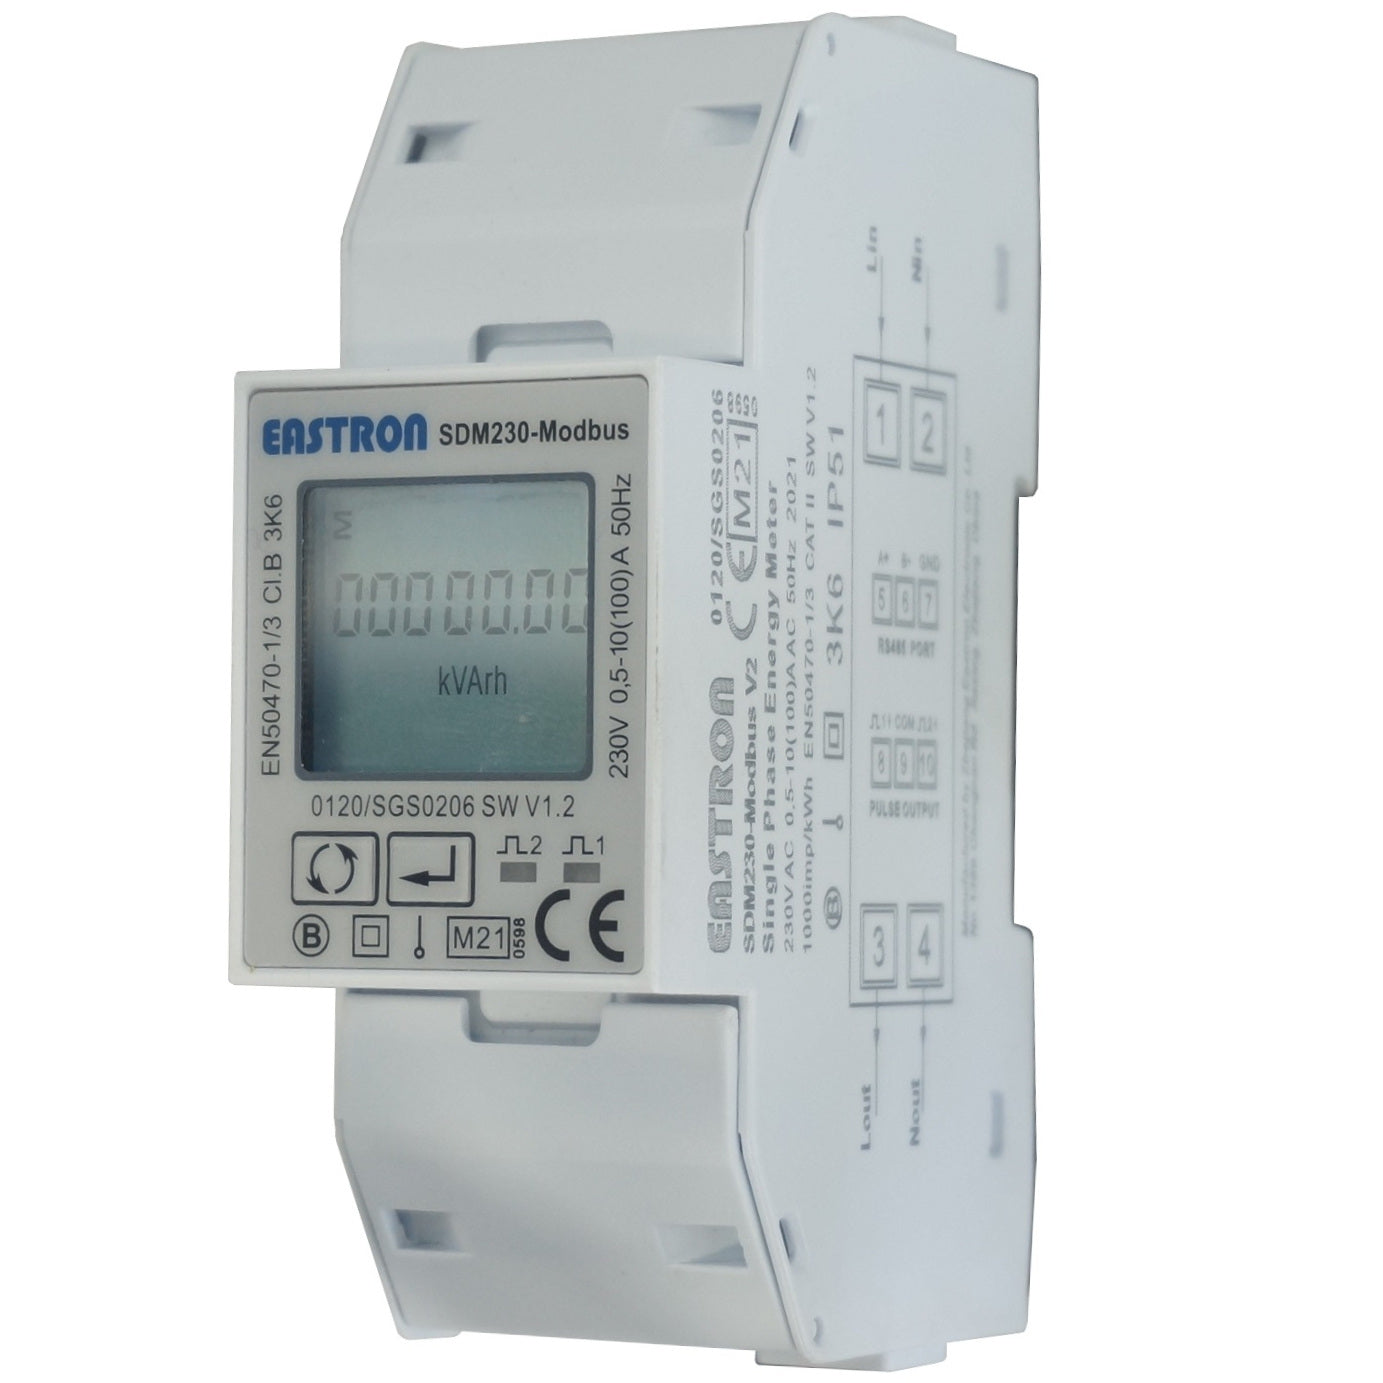 SDM230-LORAWAN-MID-AS923, DIN Rail Mount kWh Meter, Single Phase, 240VAC aux, Class 1, 100Amp Direct Connect, w/ 2 x pulse outputs and LoRaWaN AS923 Wireless Comms, MID Approved